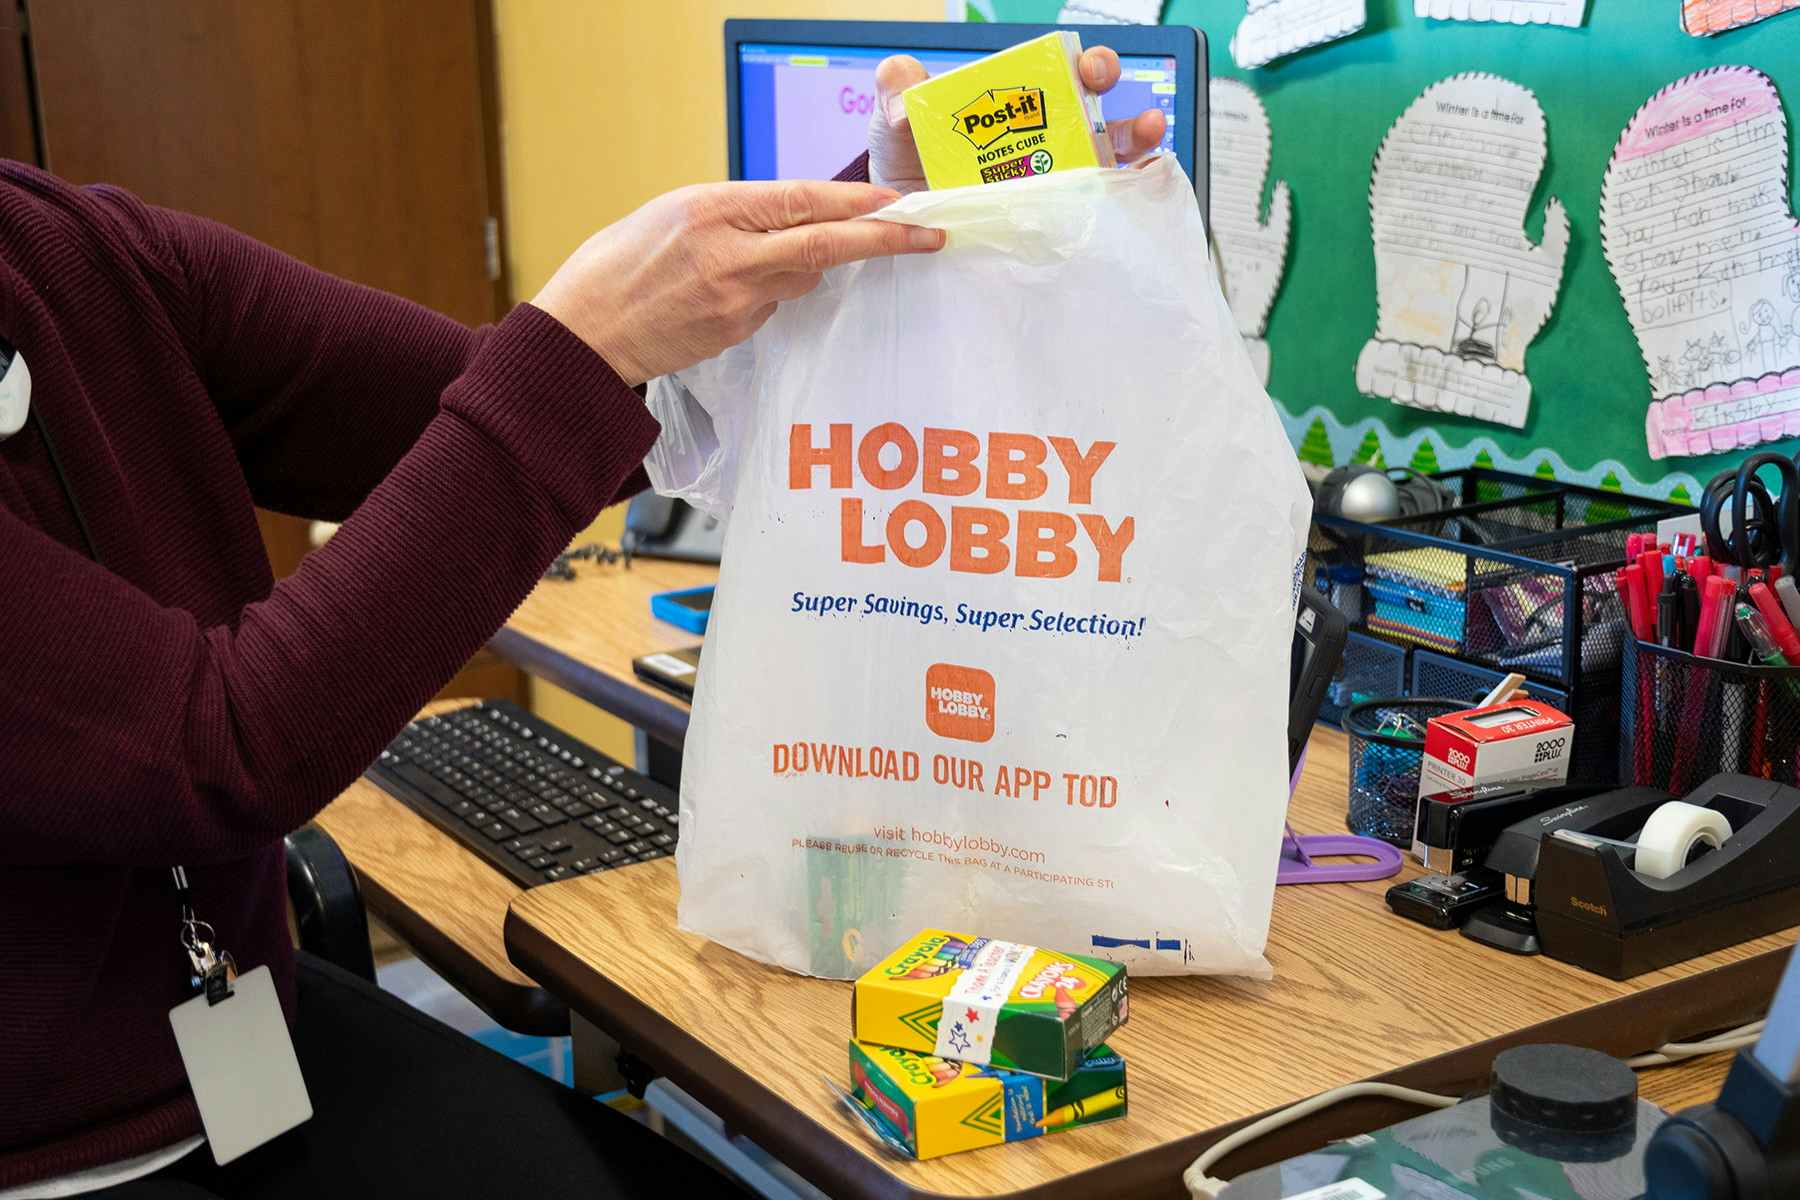 Postit Notes being pulled from a Hobby Lobby shopping bag in a grade school class room.